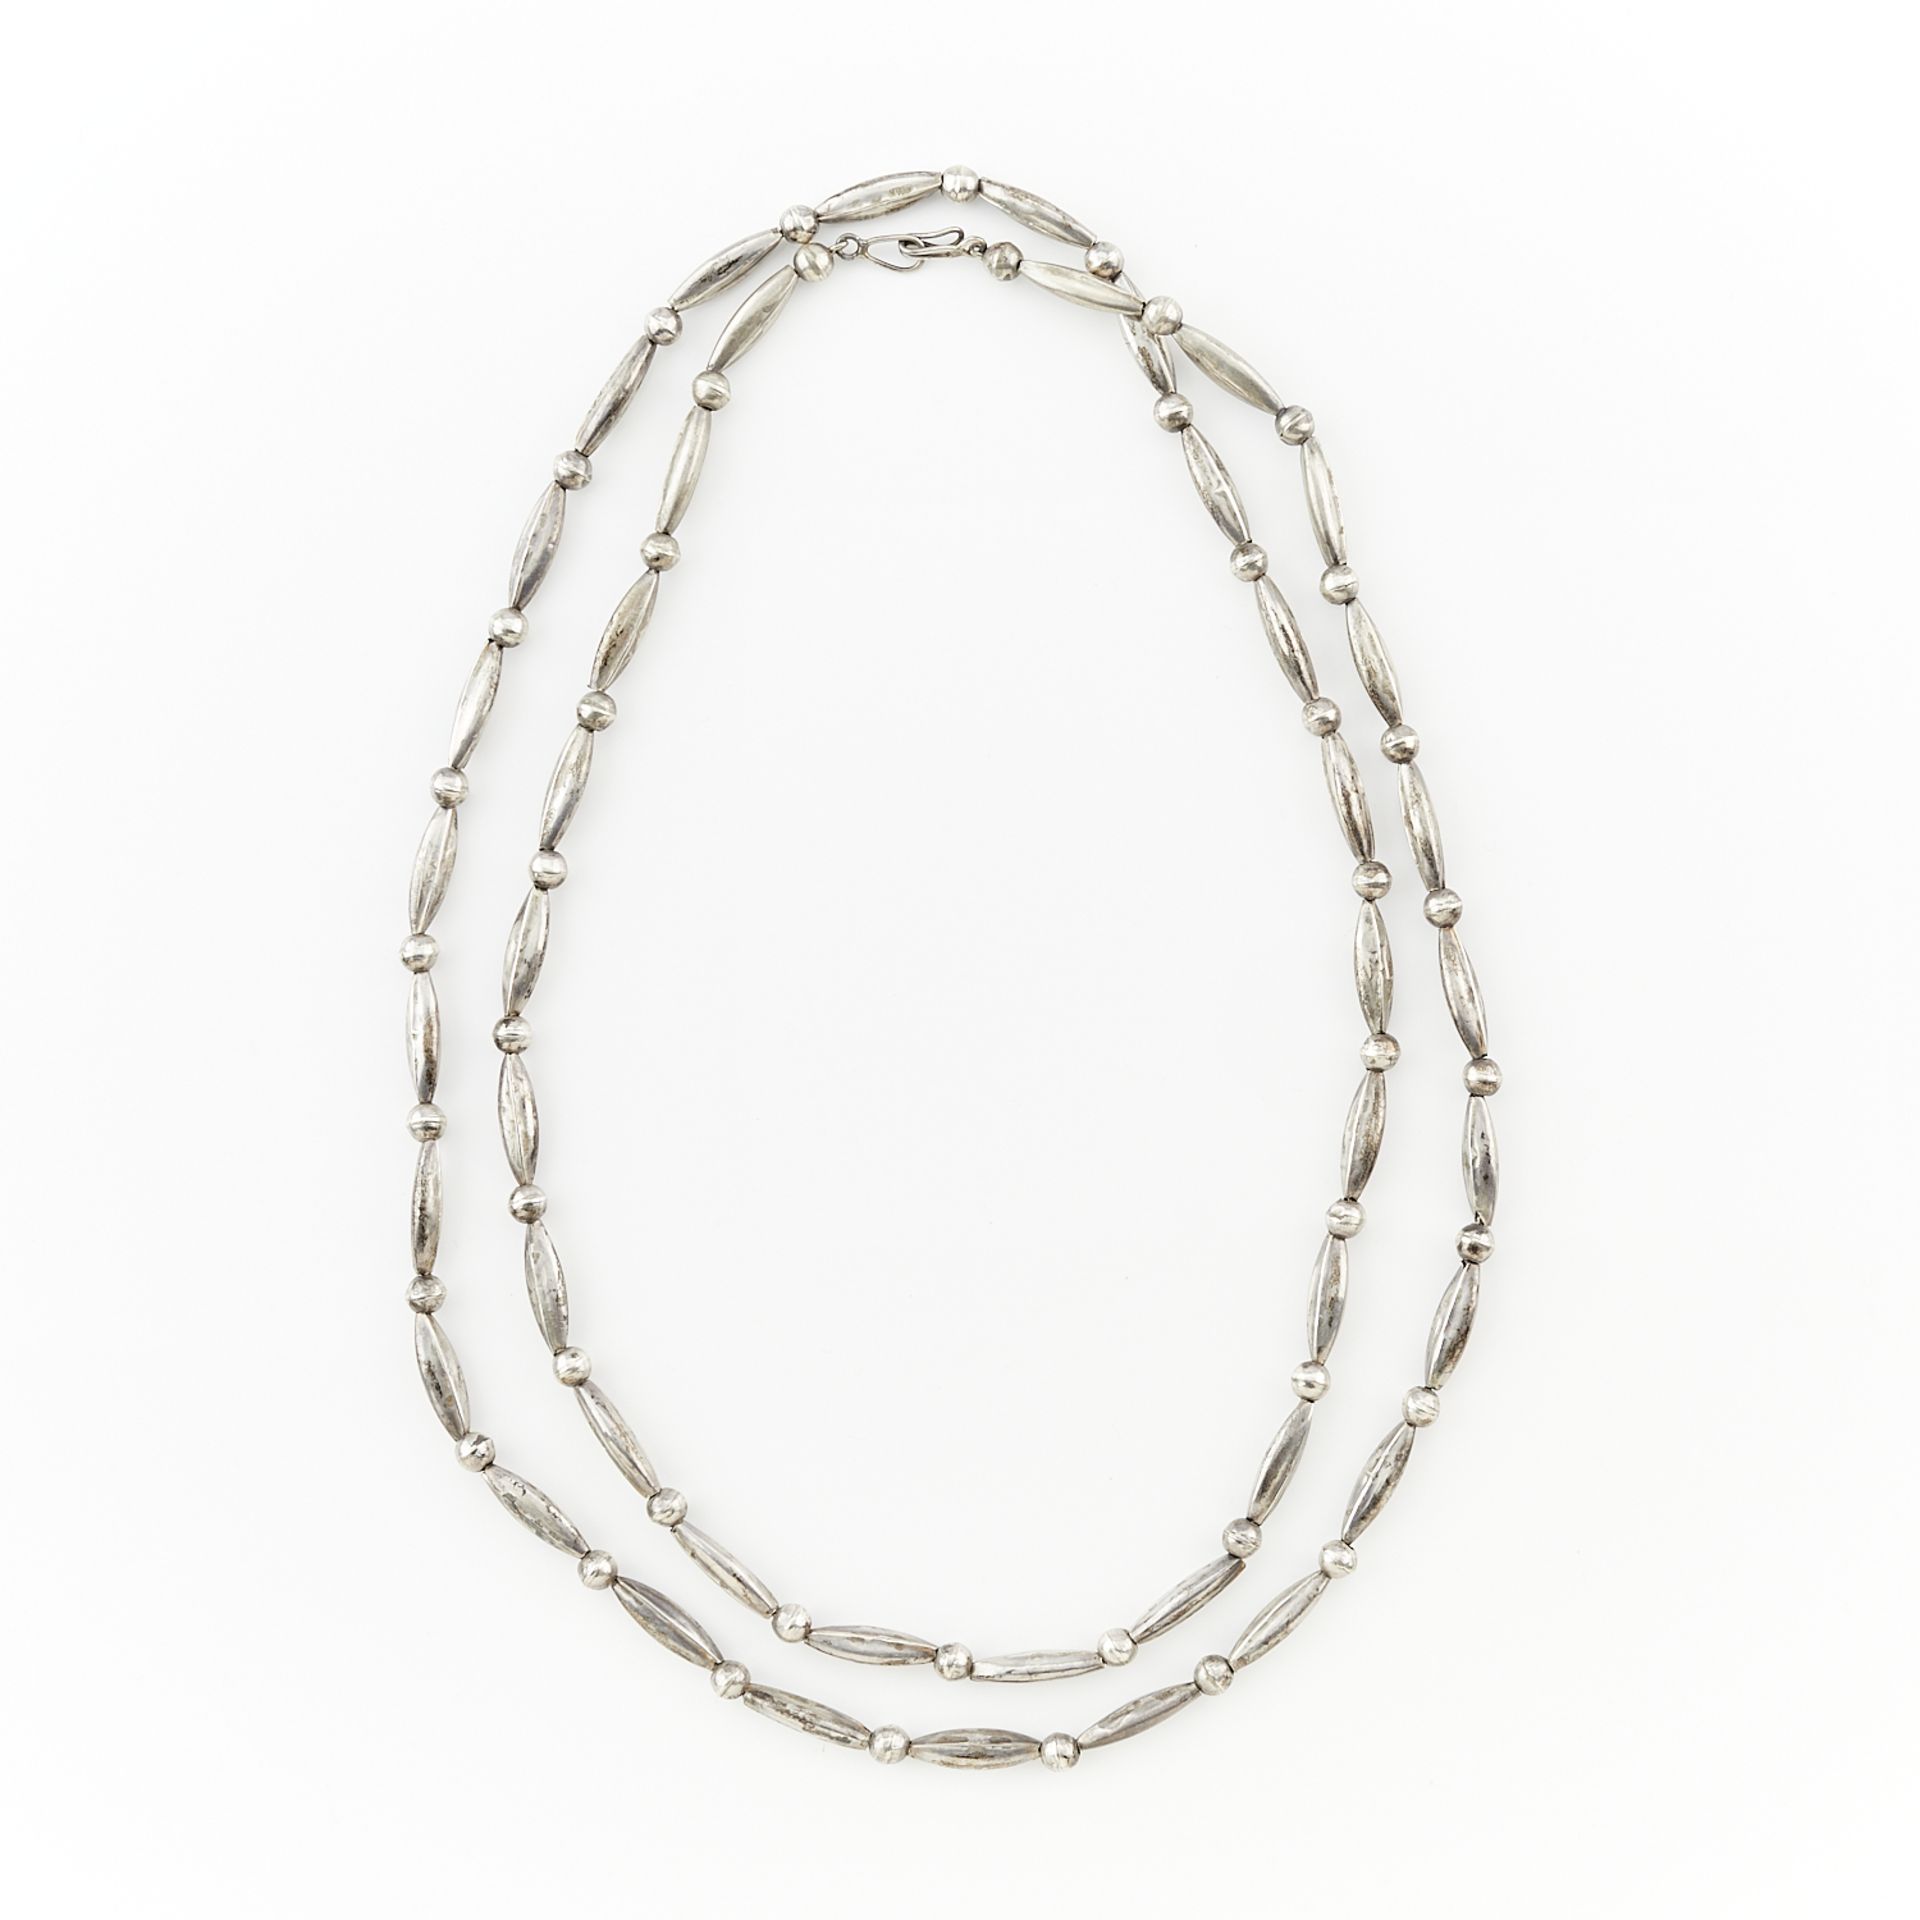 Silver Beaded Necklace - Image 4 of 6